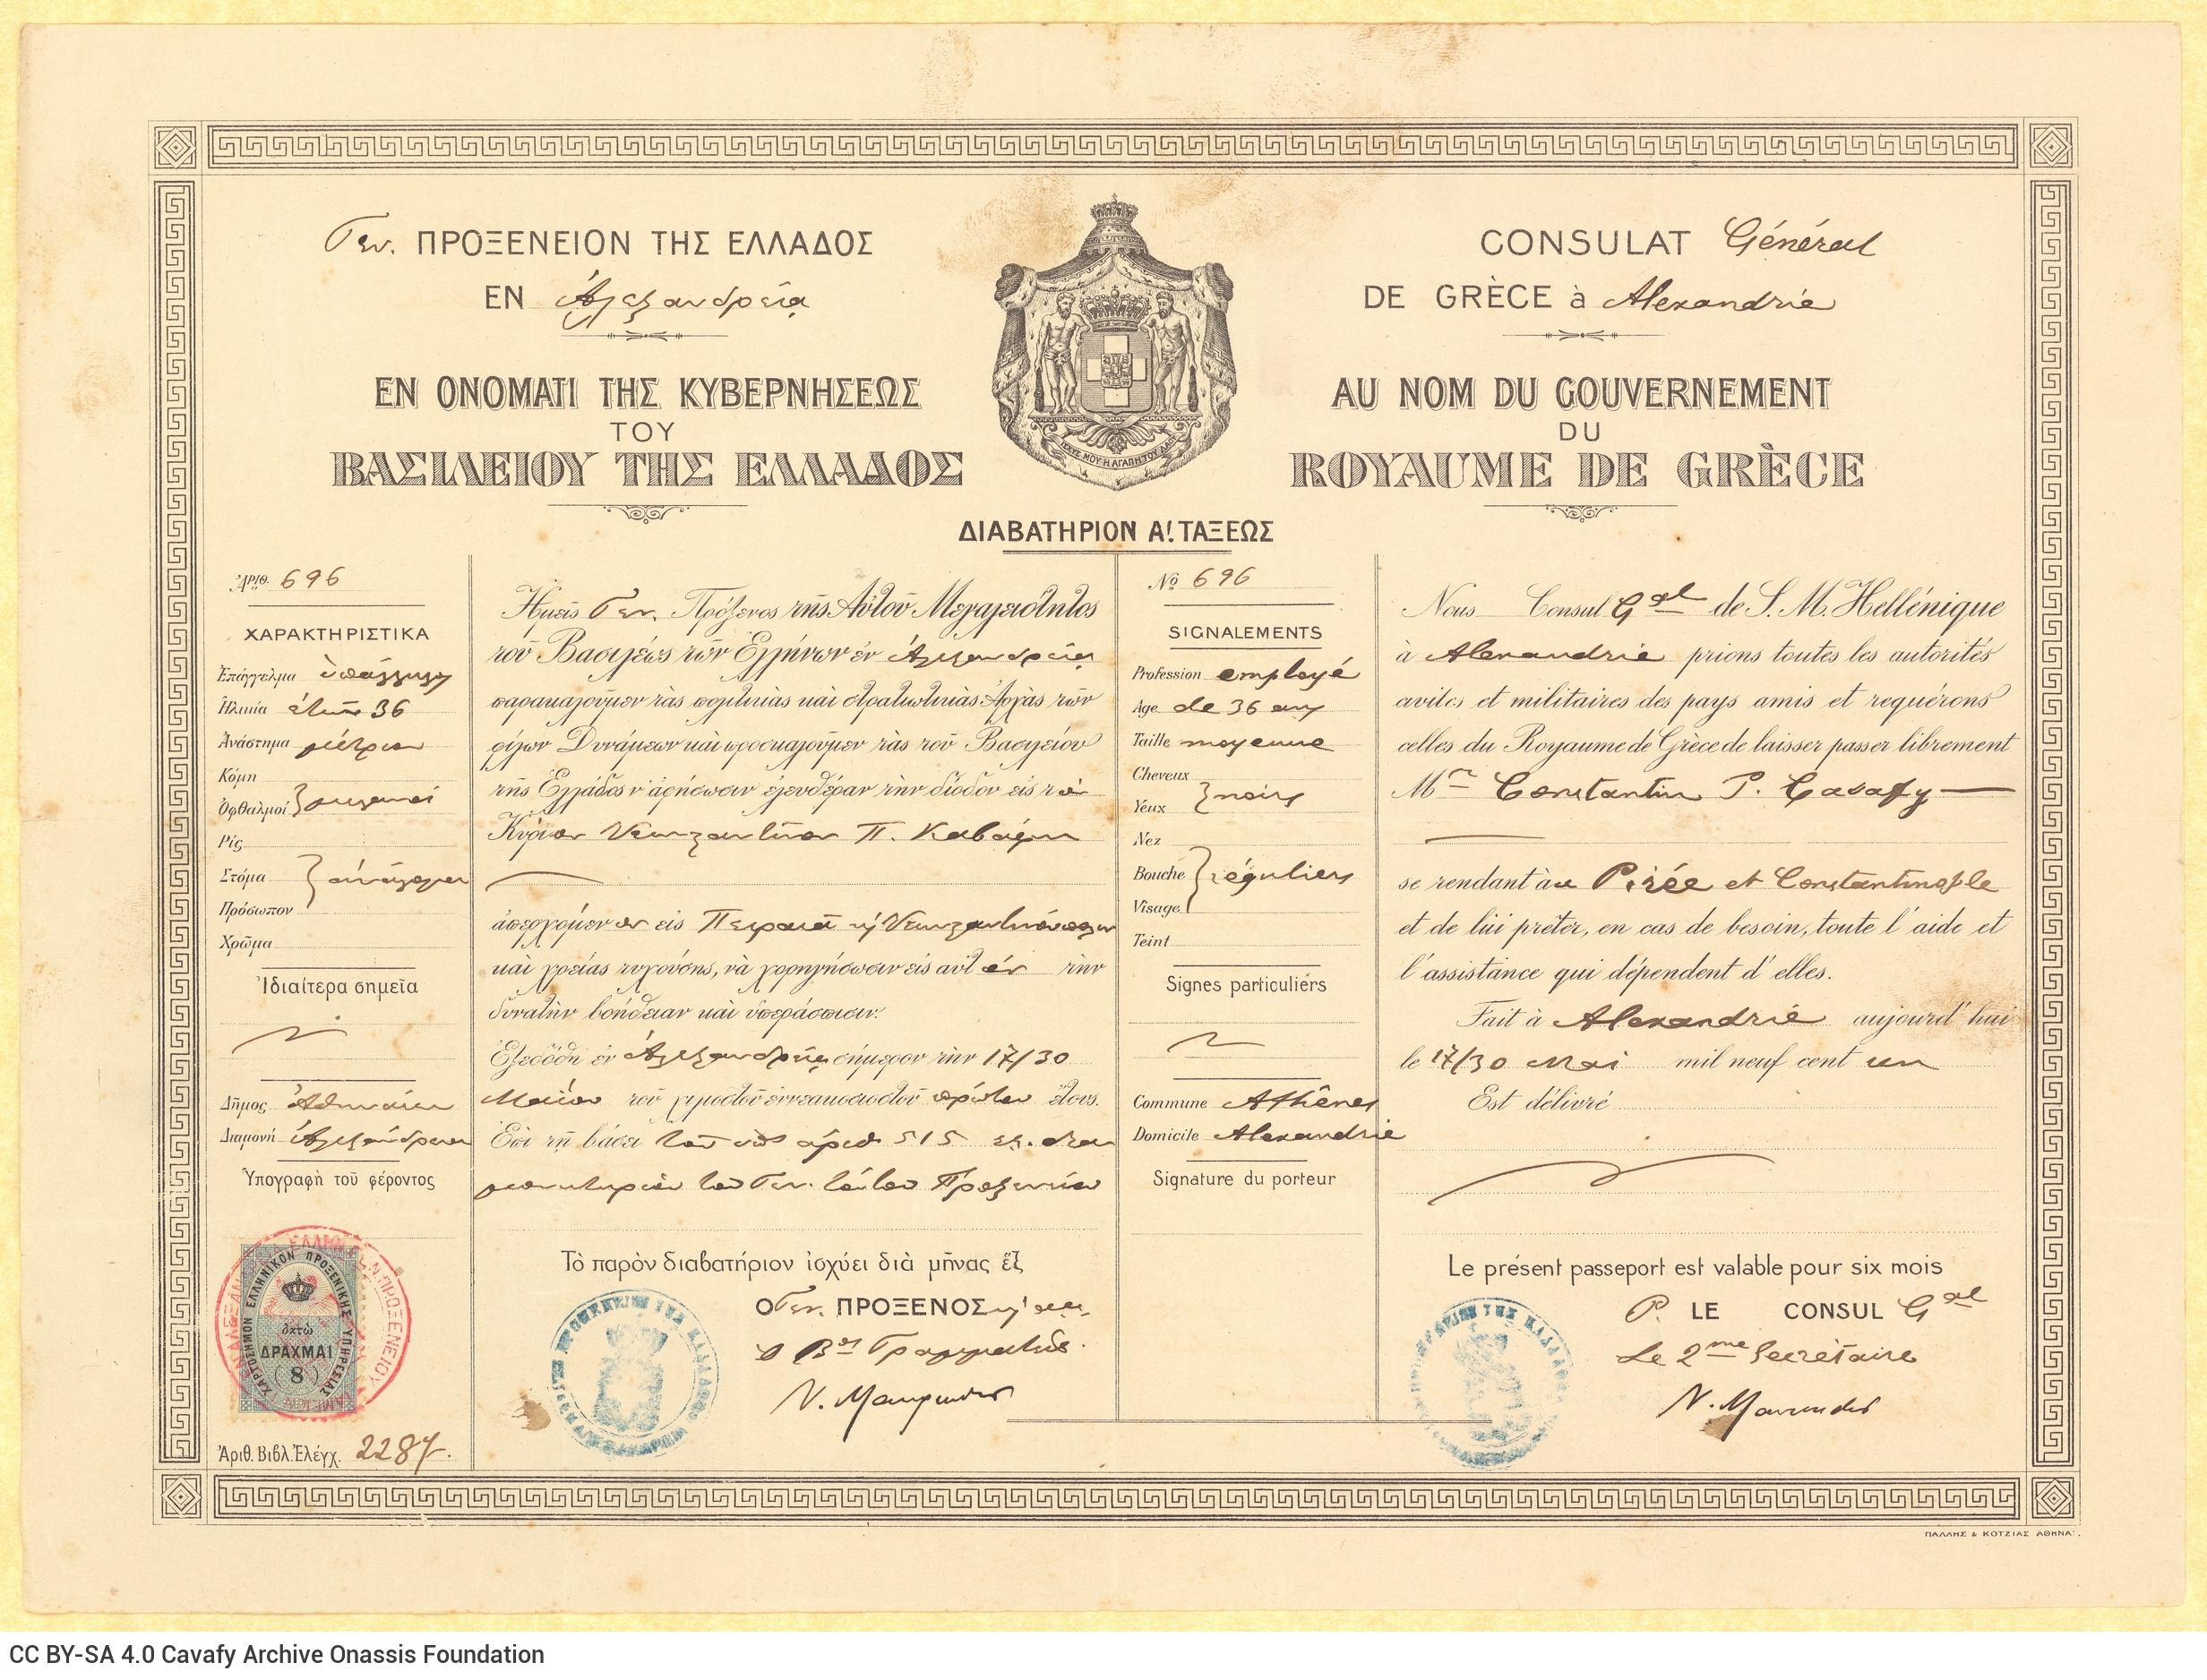 Cavafy's 1st class passport issued in Alexandria and valid for six months. The bearer's details, signature and date are ha